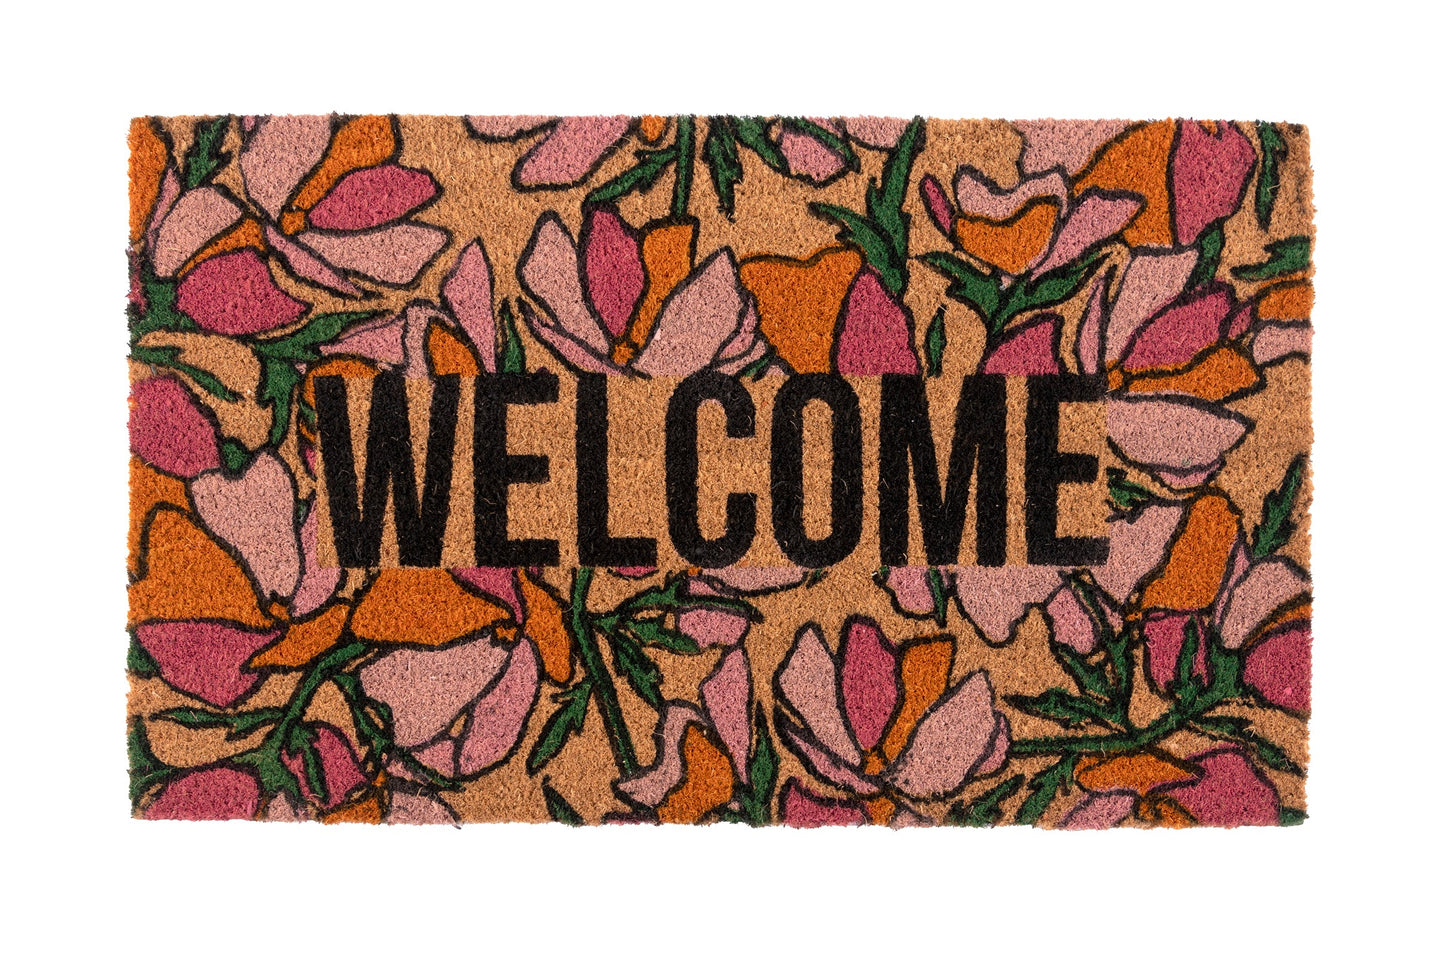 Shiraleah "Welcome" Floral Doormat, Multi by Shiraleah